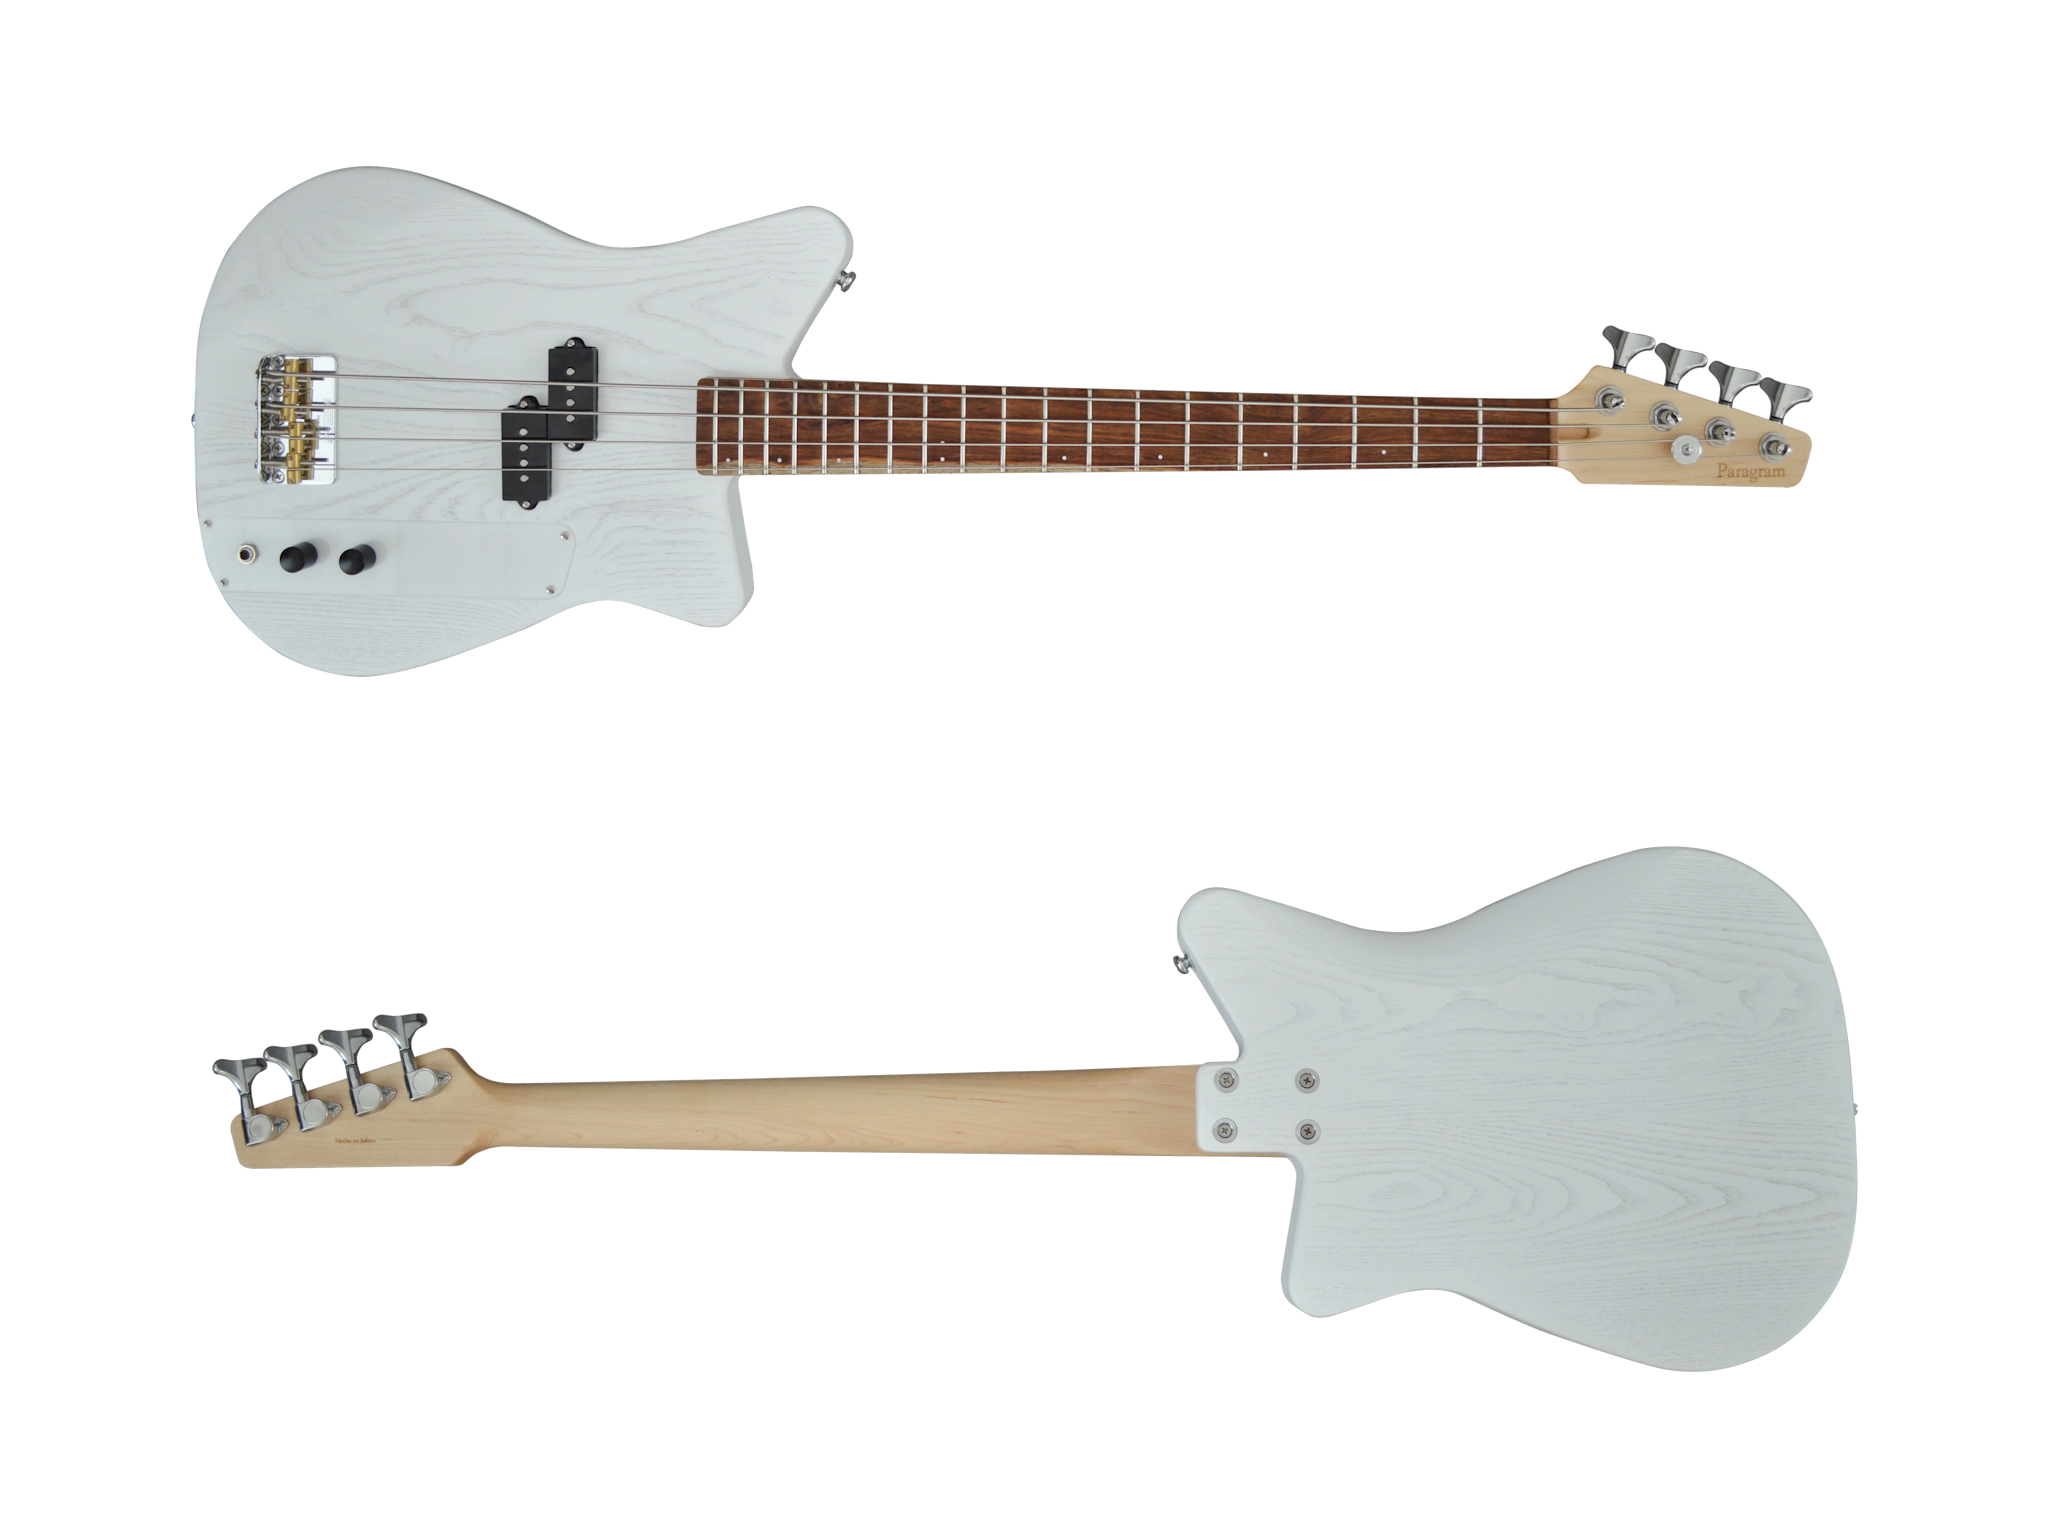 Featuring a convenient 30" scale length, this model offers enhanced playability, making it ideal for faster playing styles and players with smaller hands. It's not only practical and comfortable but also highly customizable.